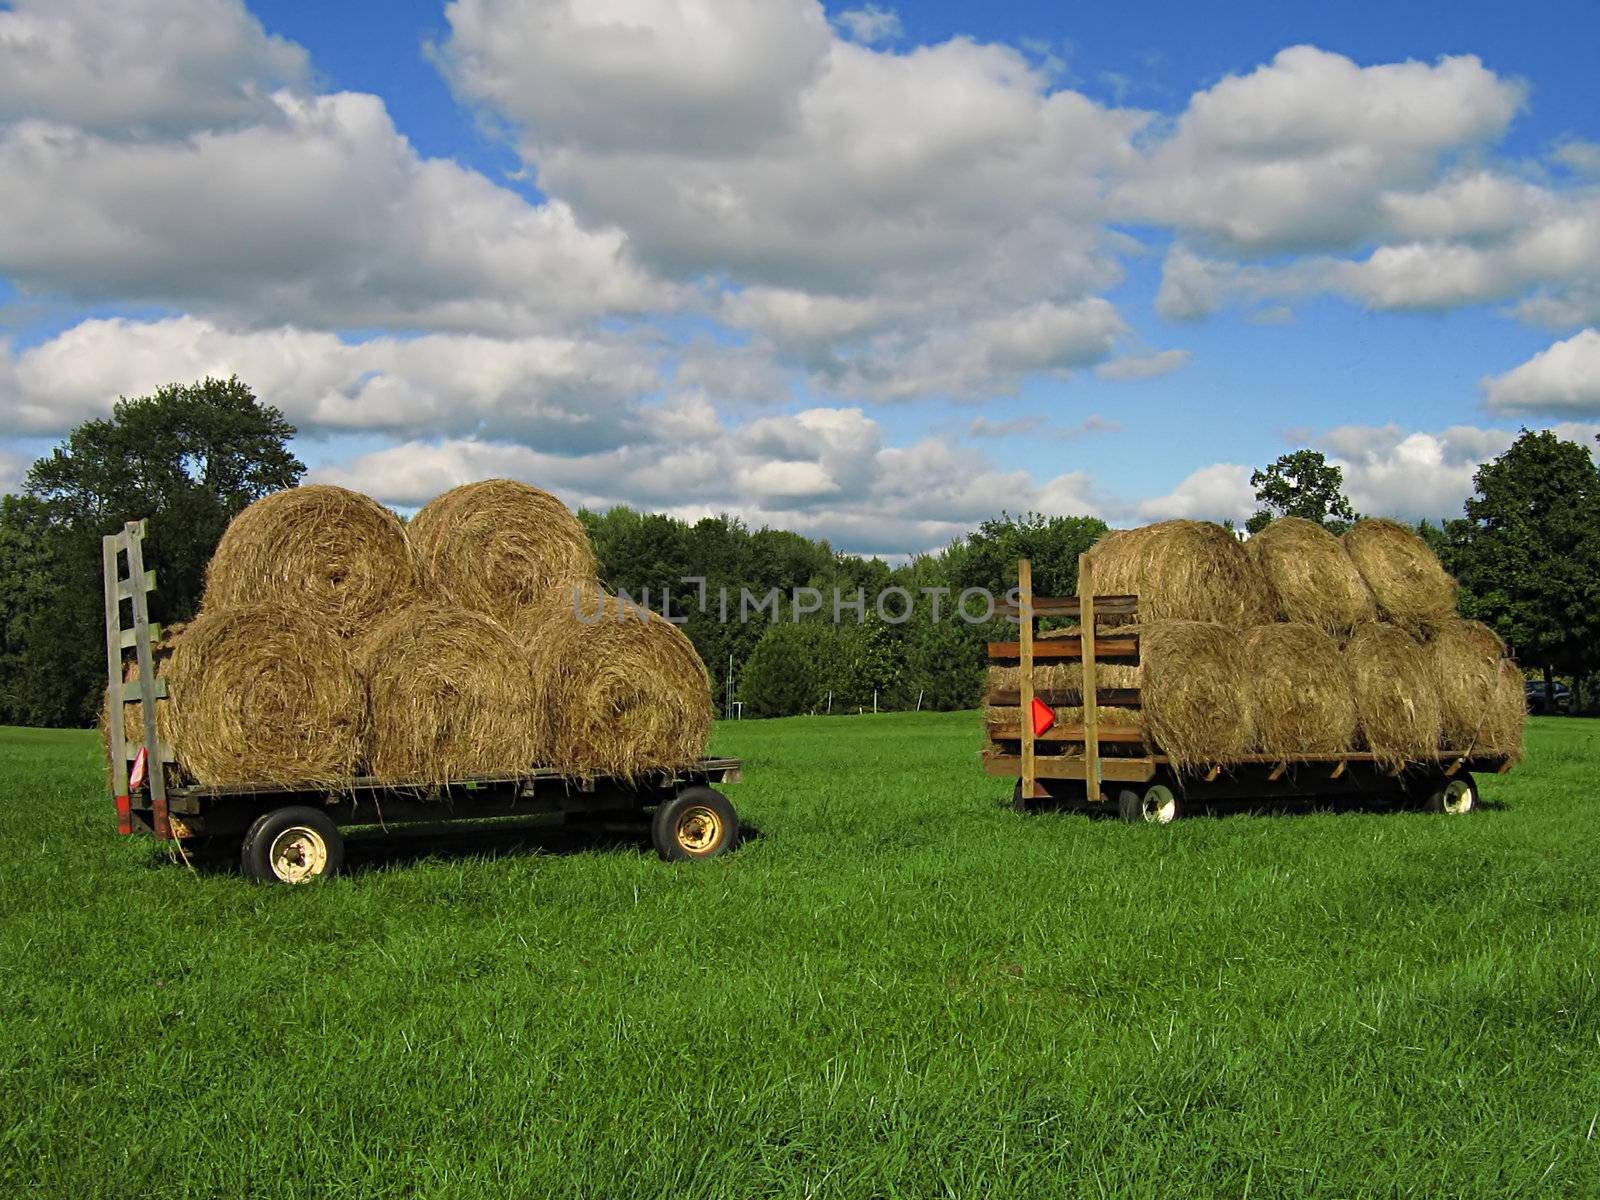 A photograph of two farm wagons loaded with hay.